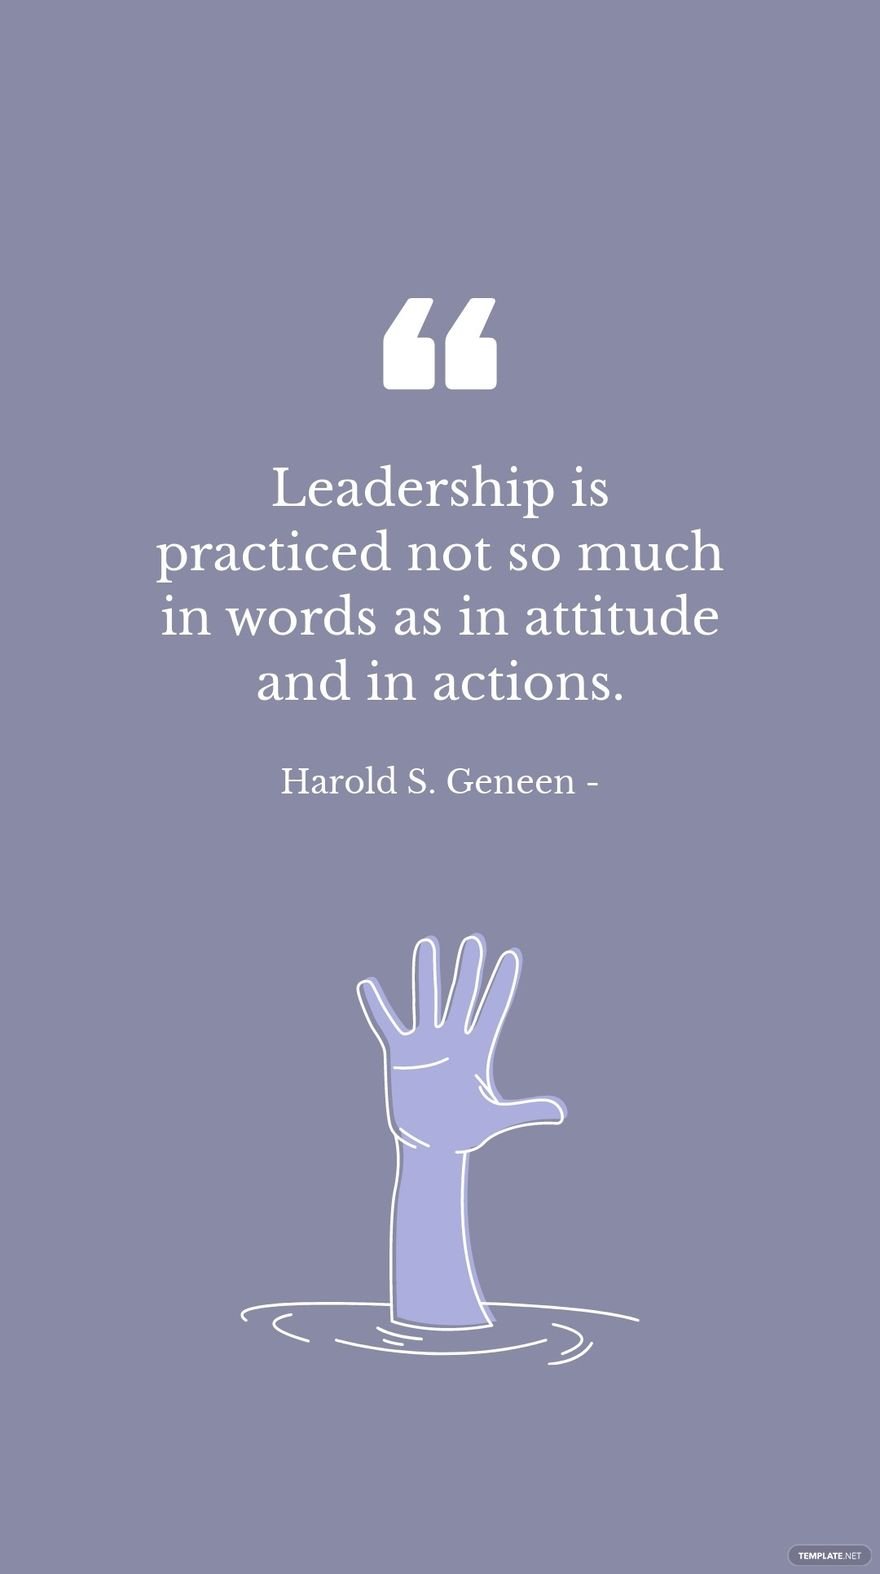 Harold S. Geneen - Leadership is practiced not so much in words as in attitude and in actions.